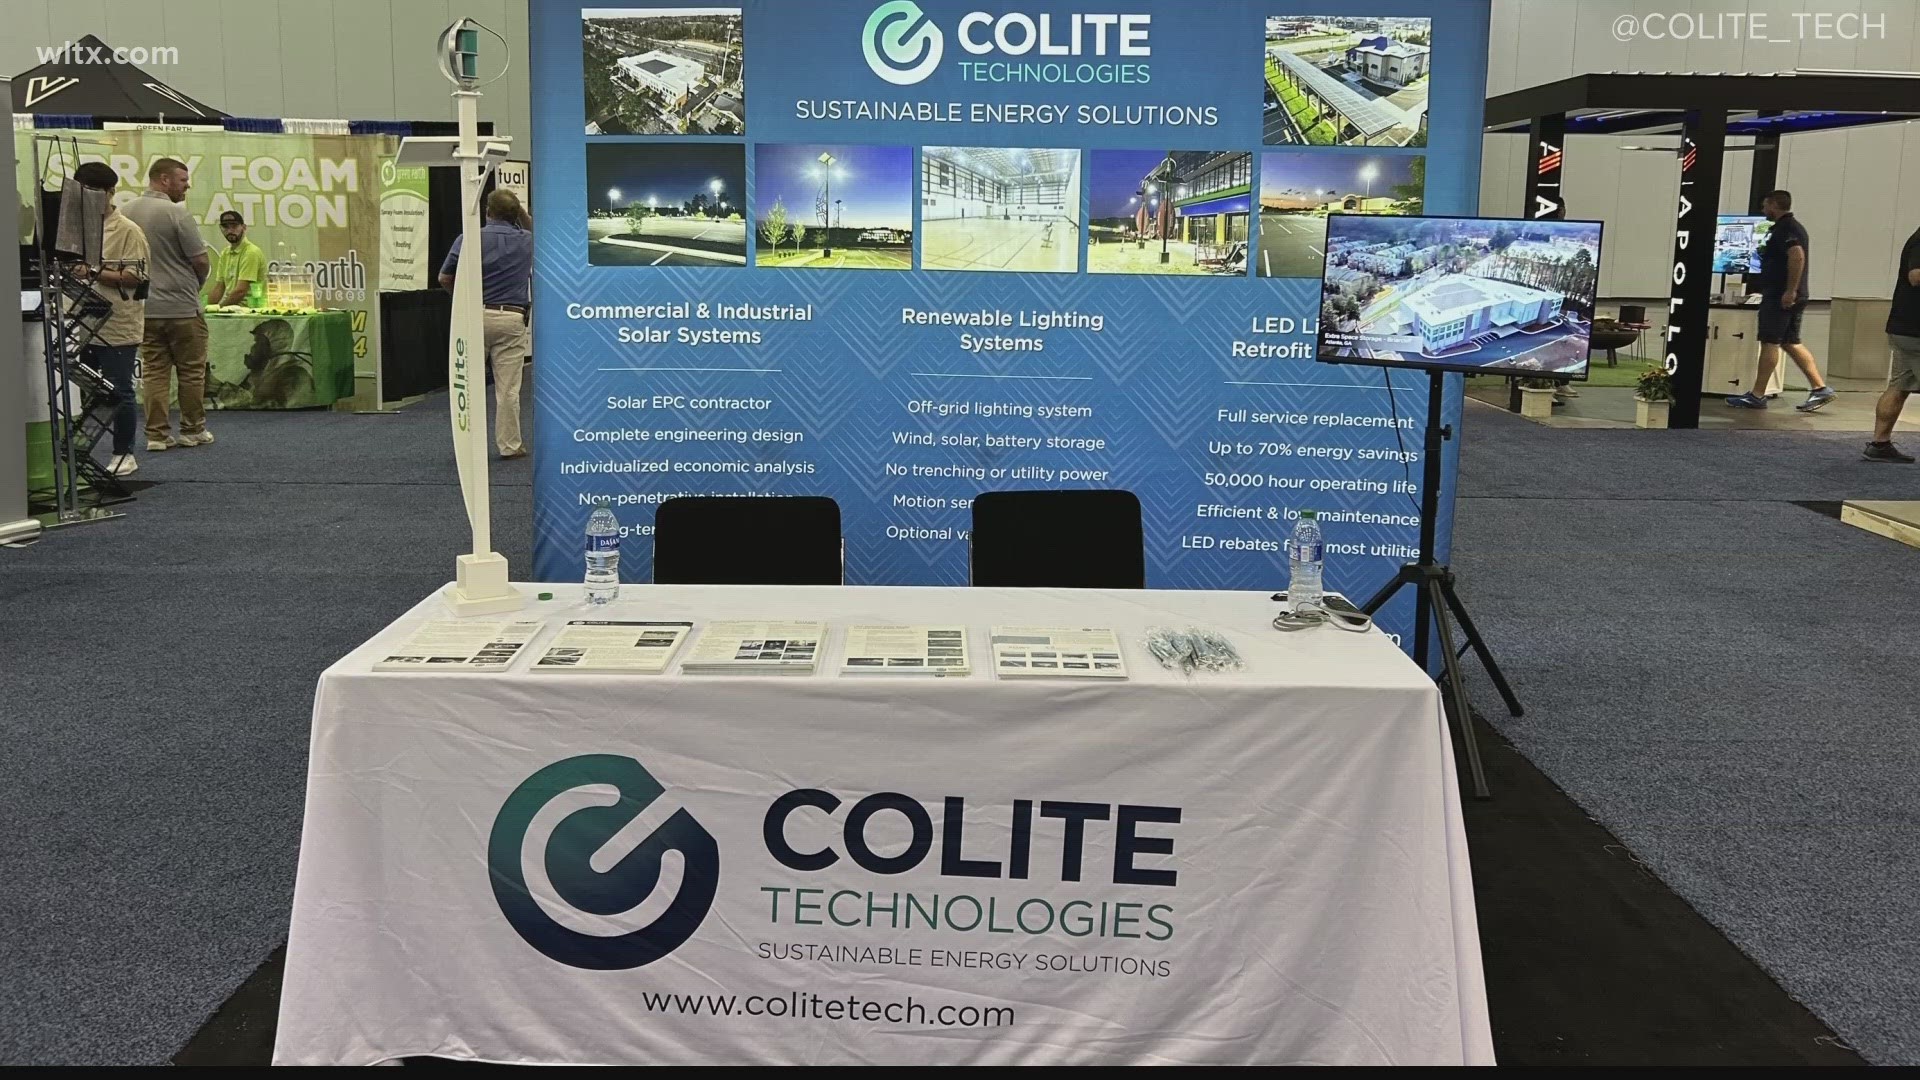 Colite Technologies, a company specializing in renewable energy solutions, announced it has purchased a new building in Columbia to renovate.